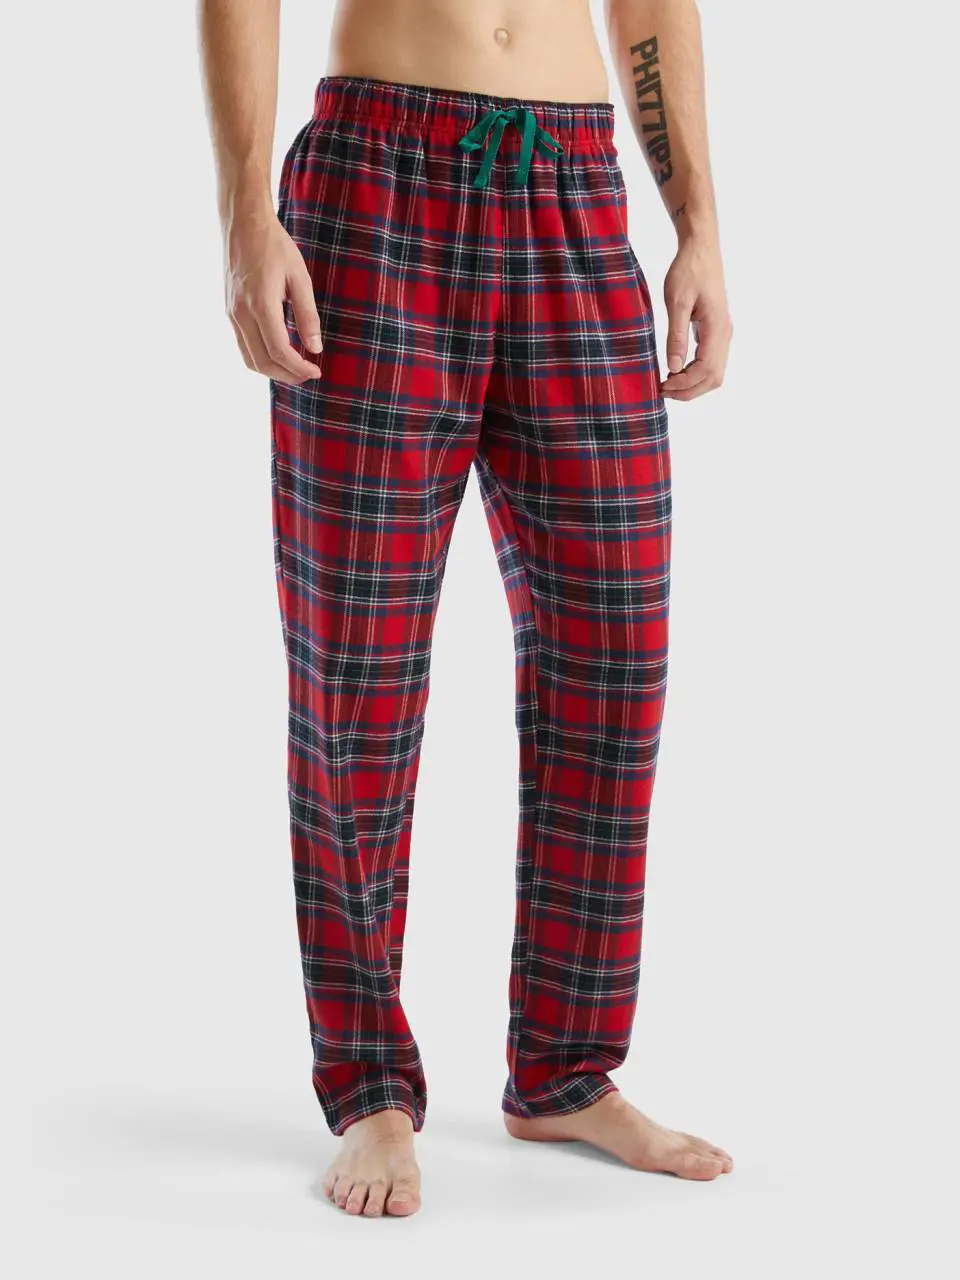 Benetton red and blue tartan trousers. 1